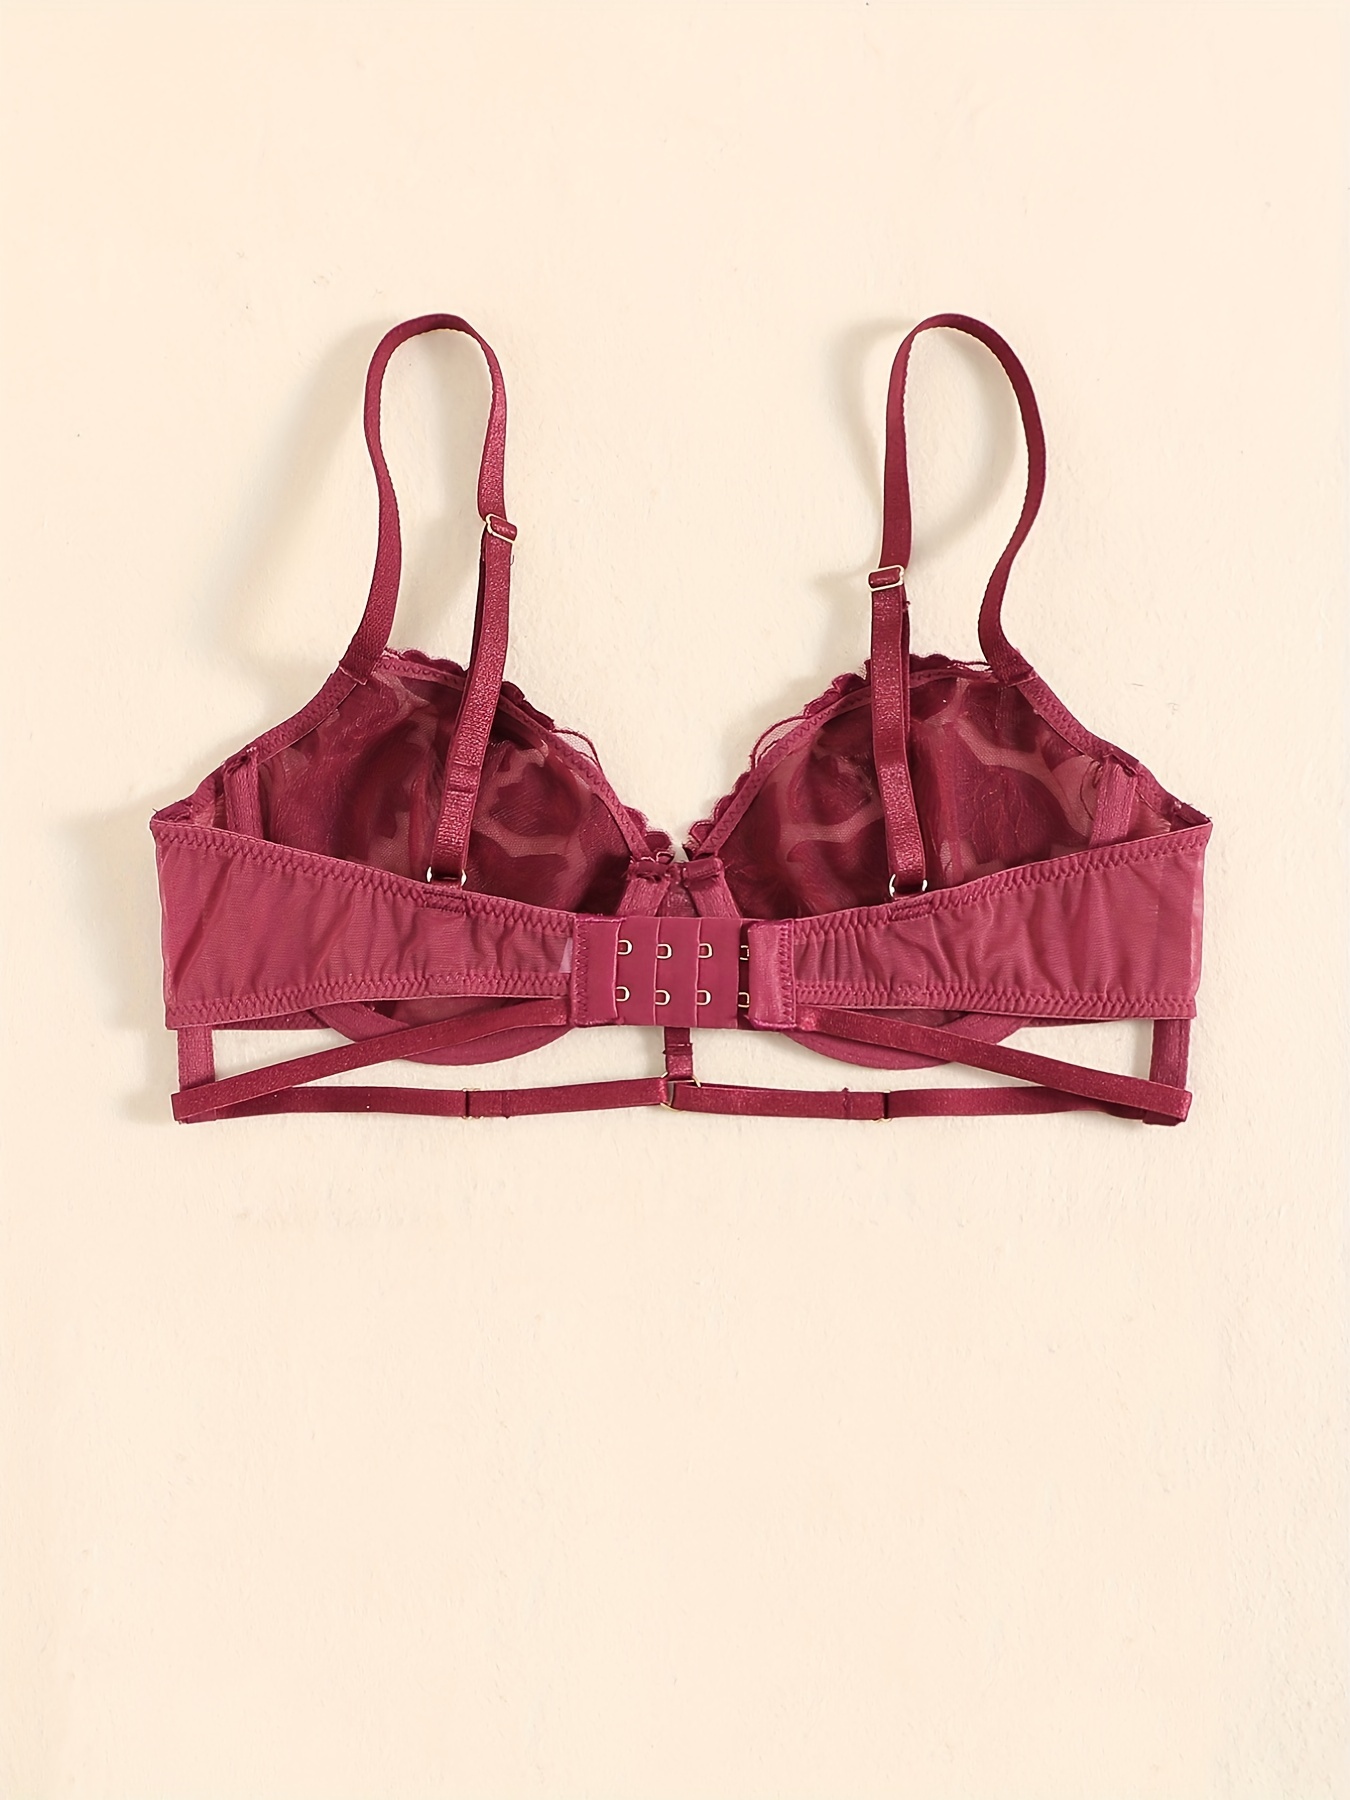 Floral Lace Unlined Bra in Red